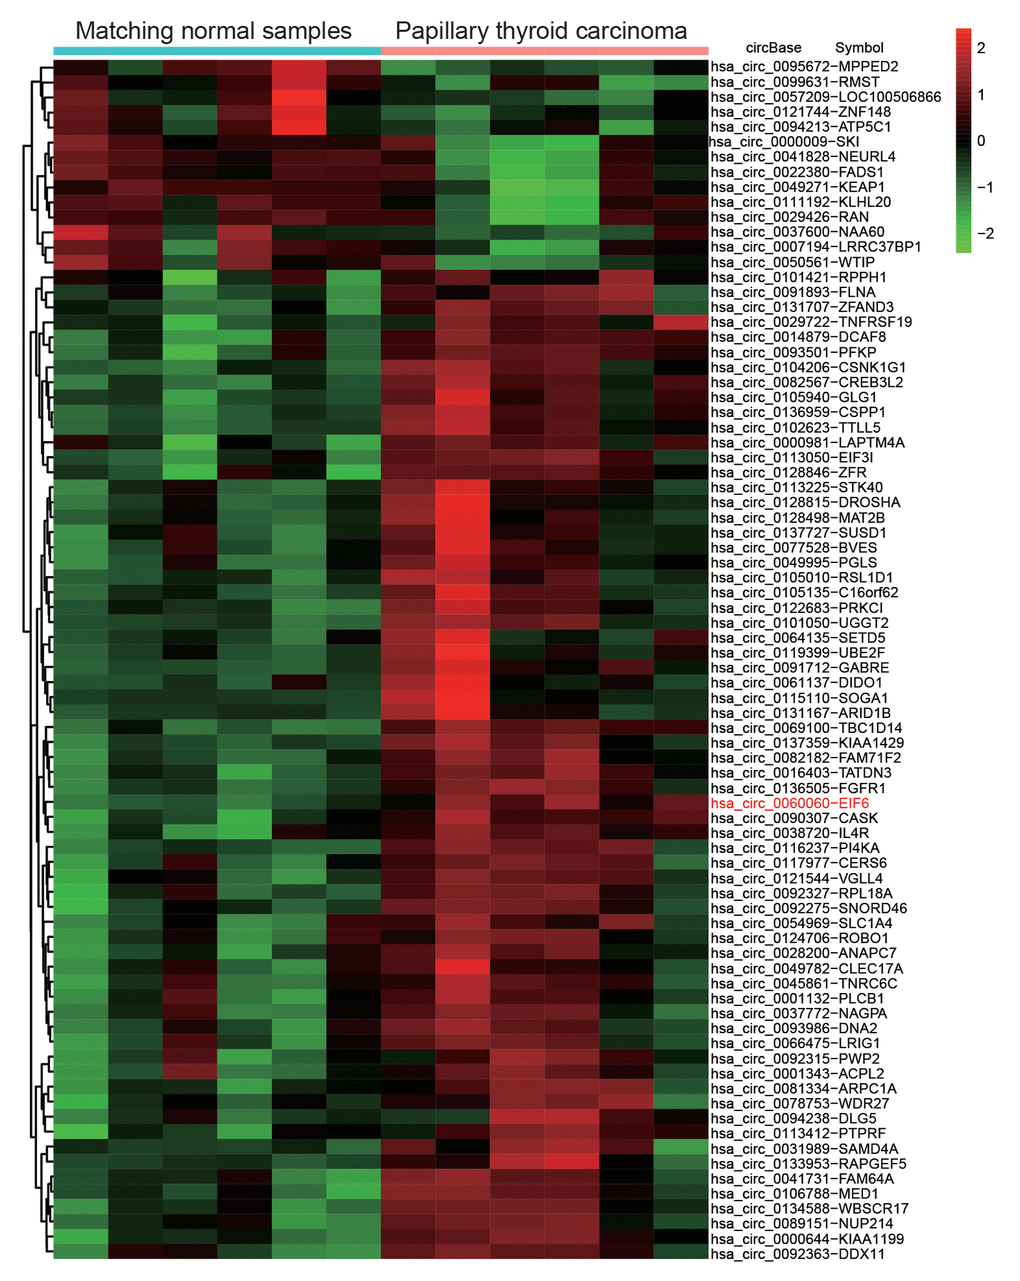 Differential expression analysis of circular RNAs showed circEIF6 was highly expressed in papillary thyroid carcinoma. Heat map was generated by differential expression analysis of circular RNAs with GEO data (GEO accession: GSE93522) and revealed circEIF6 was highly expressed in papillary thyroid carcinoma.